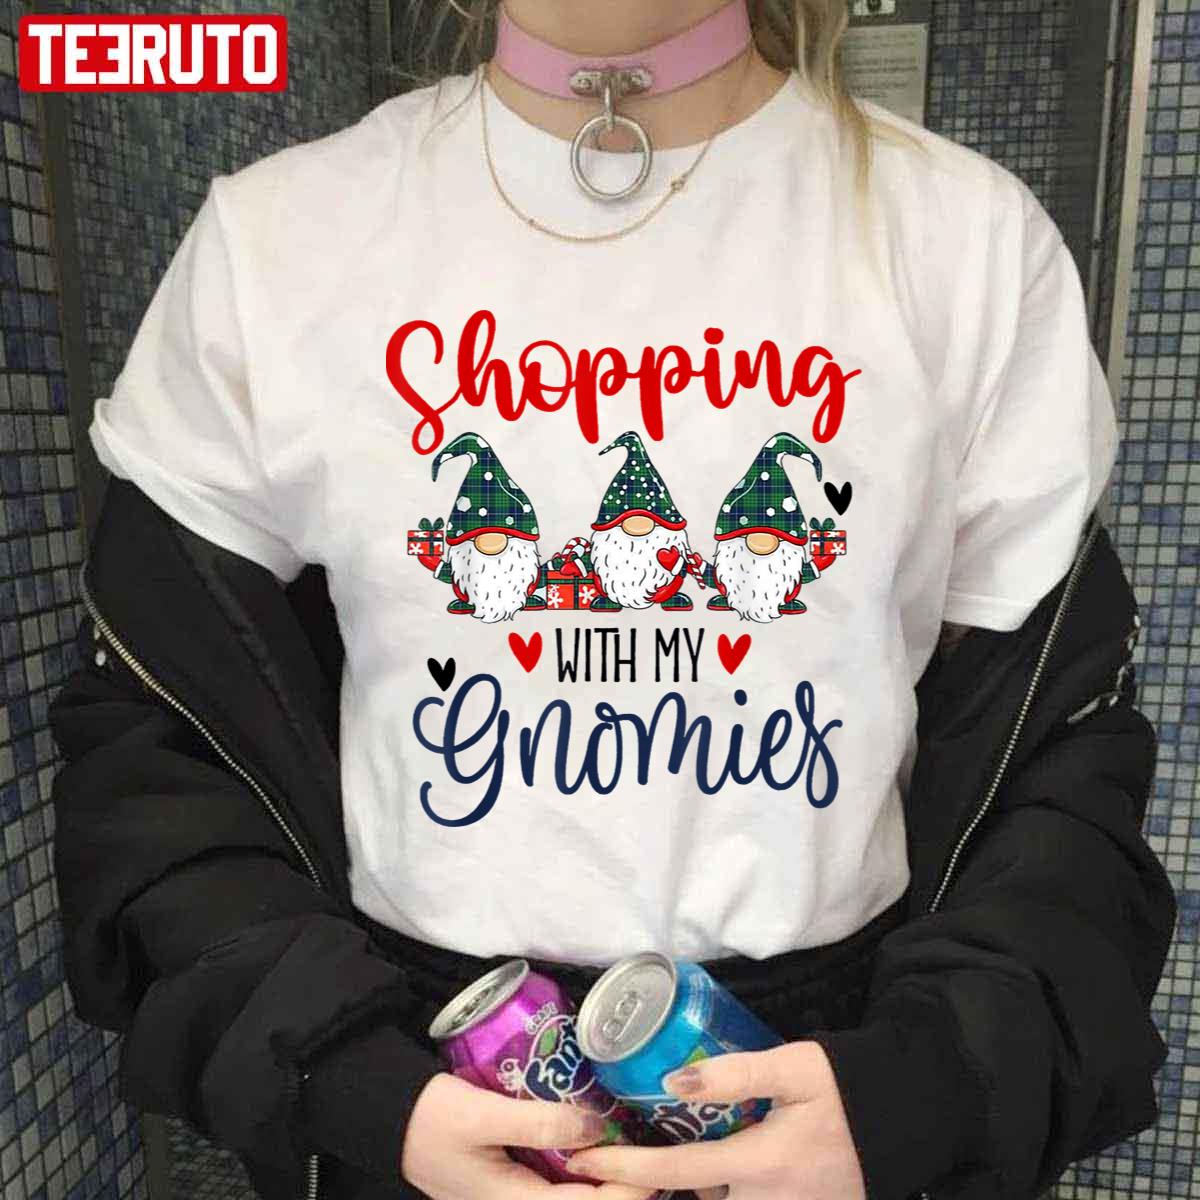 Hearts To You Shopping With My Gnomies Unisex Sweatshirt